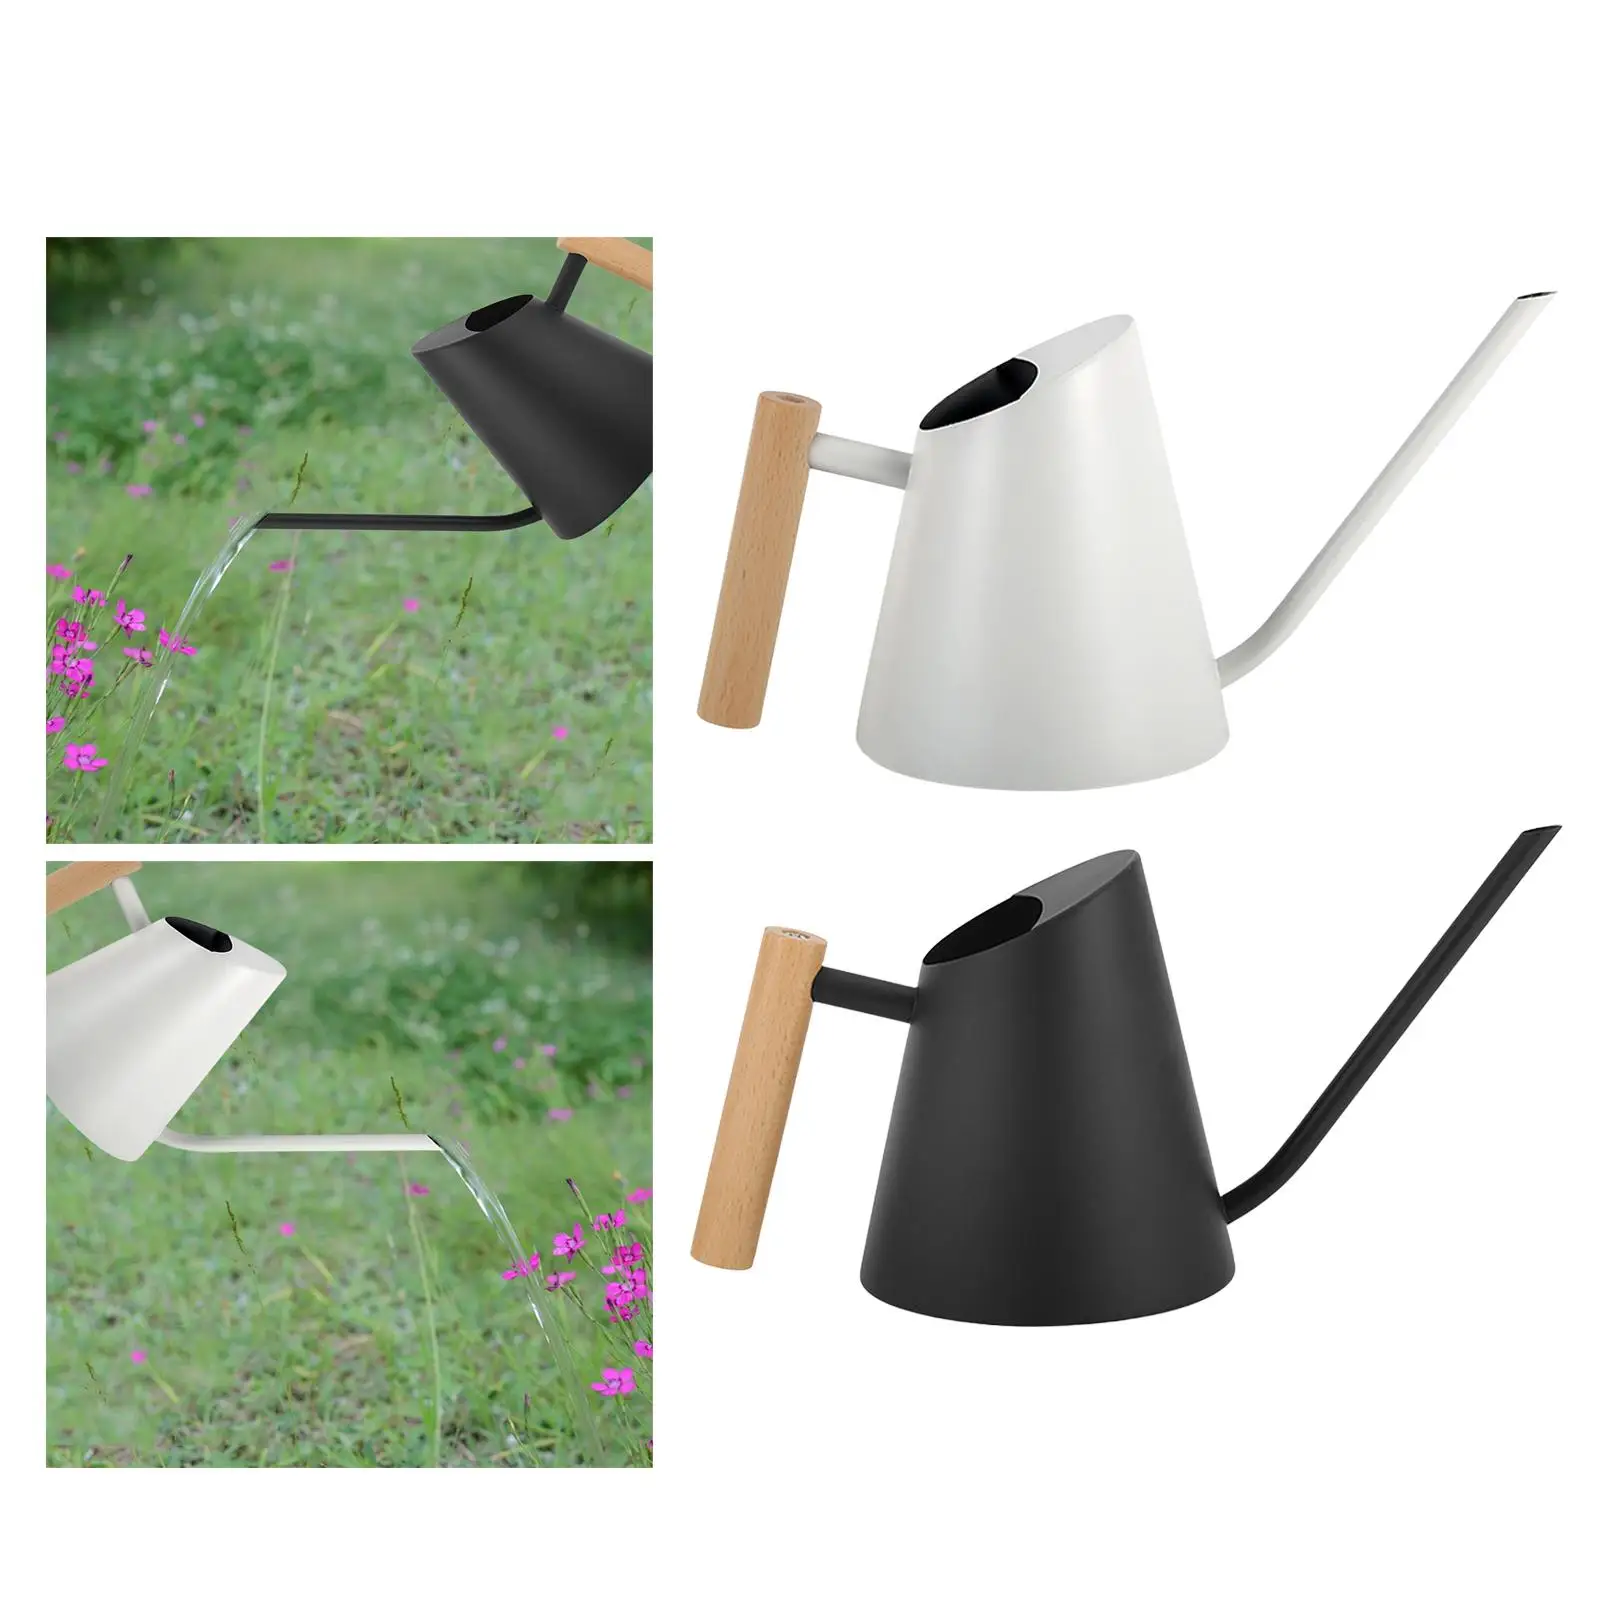 Watering Pot Wooden Handle Long Mouth Watering Flower Kettle for Garden Decorative